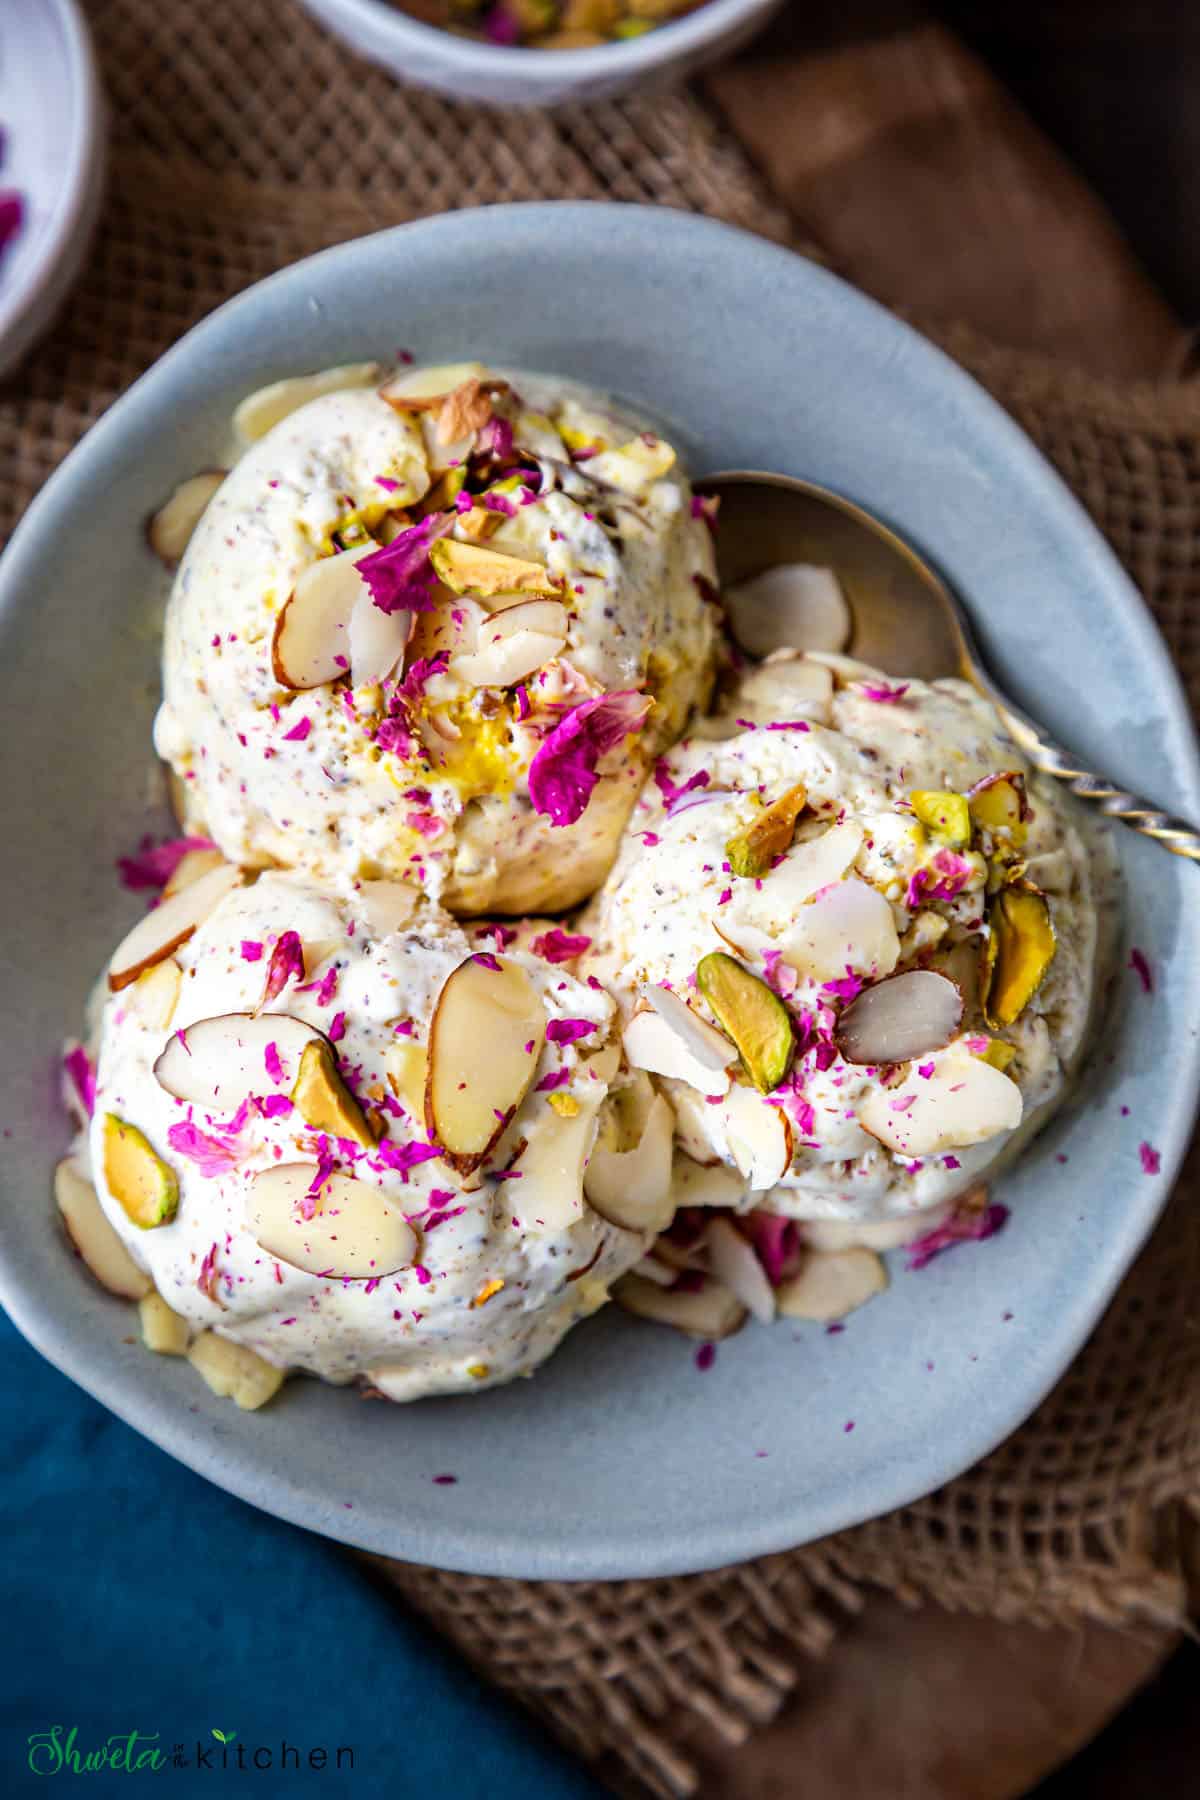 three scoops of thandai ice cream garnished with sliced almonds and dried rose petals in a blue bowl